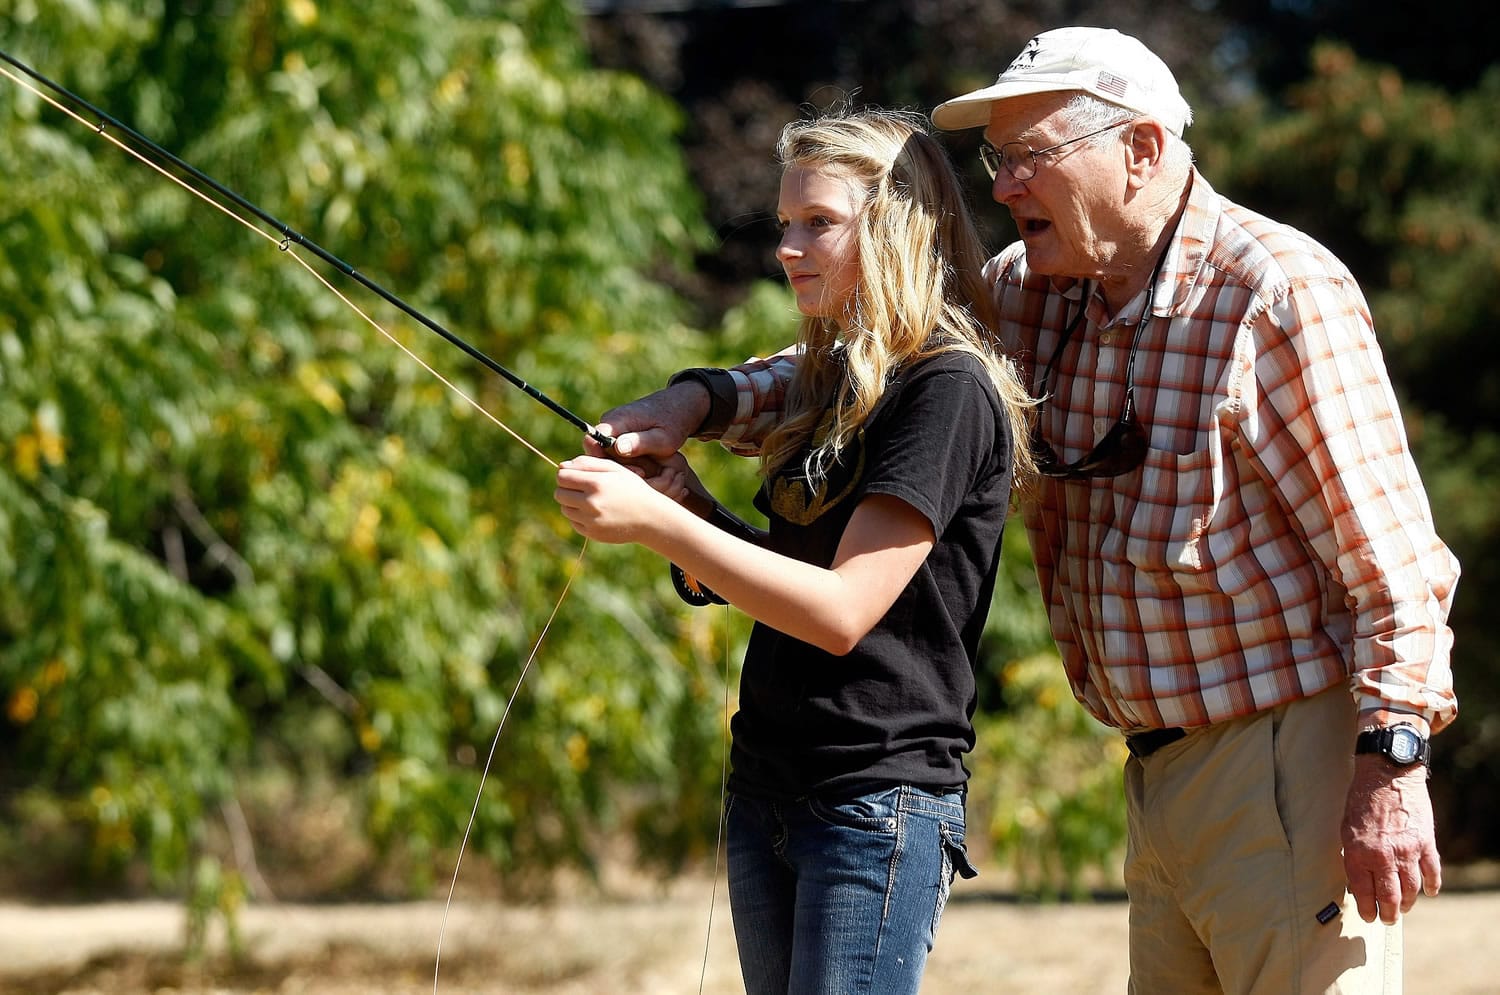 Frank Moore, of Idleyld Park, Ore., gives Brooklyn Wolfe, 11, of Camas Valley, Ore., some pointers on casting a fly rod Saturday at the North Umpqua Fly Tying Festival in Glide, Ore.